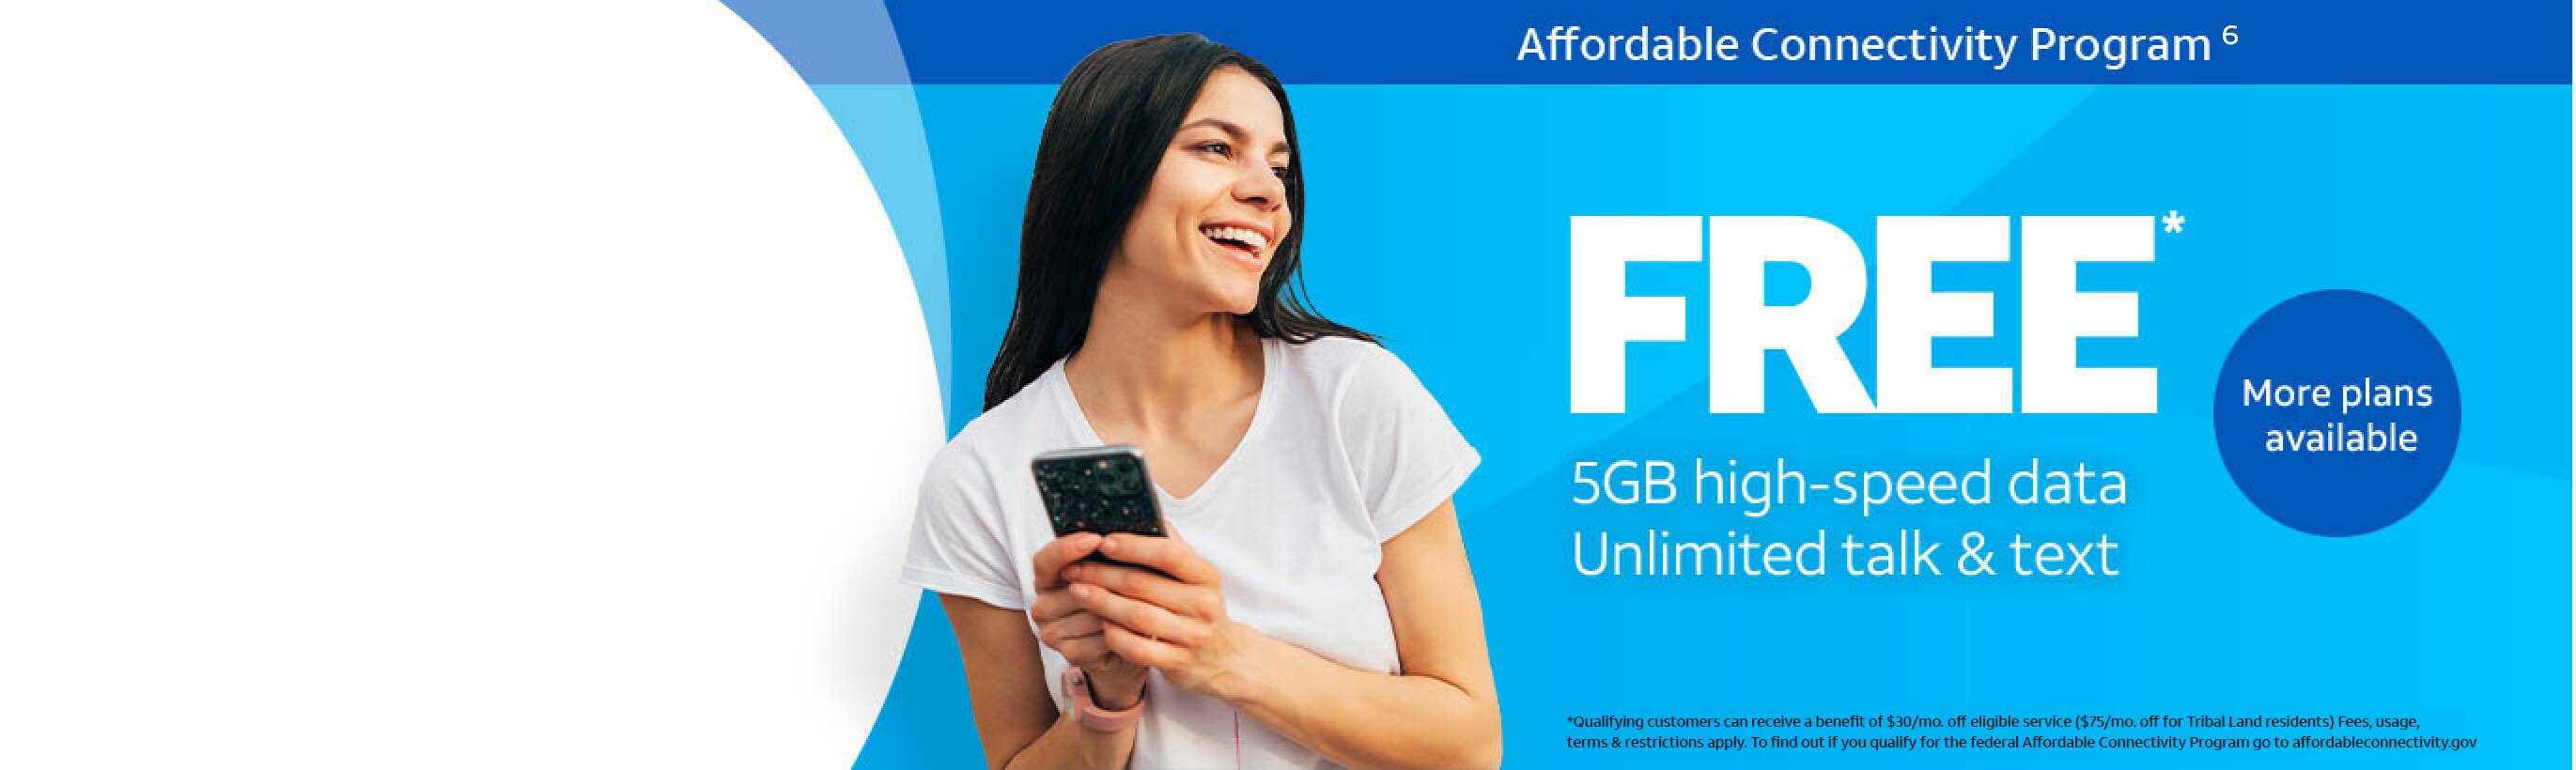 Affordable Connectivity Program - FREE 5GB high-speed data, Unlimited talk & text. More plans available. *Qualifying customers can recieve a benefit of $30/mo. off eligible service ($75/mo. off for Tribal Land resident(s) Fees, usage, terms & restrictions apply. To find out if you qualify for the federal Affordable Connectivity Program go to affordableconnectivity.gov